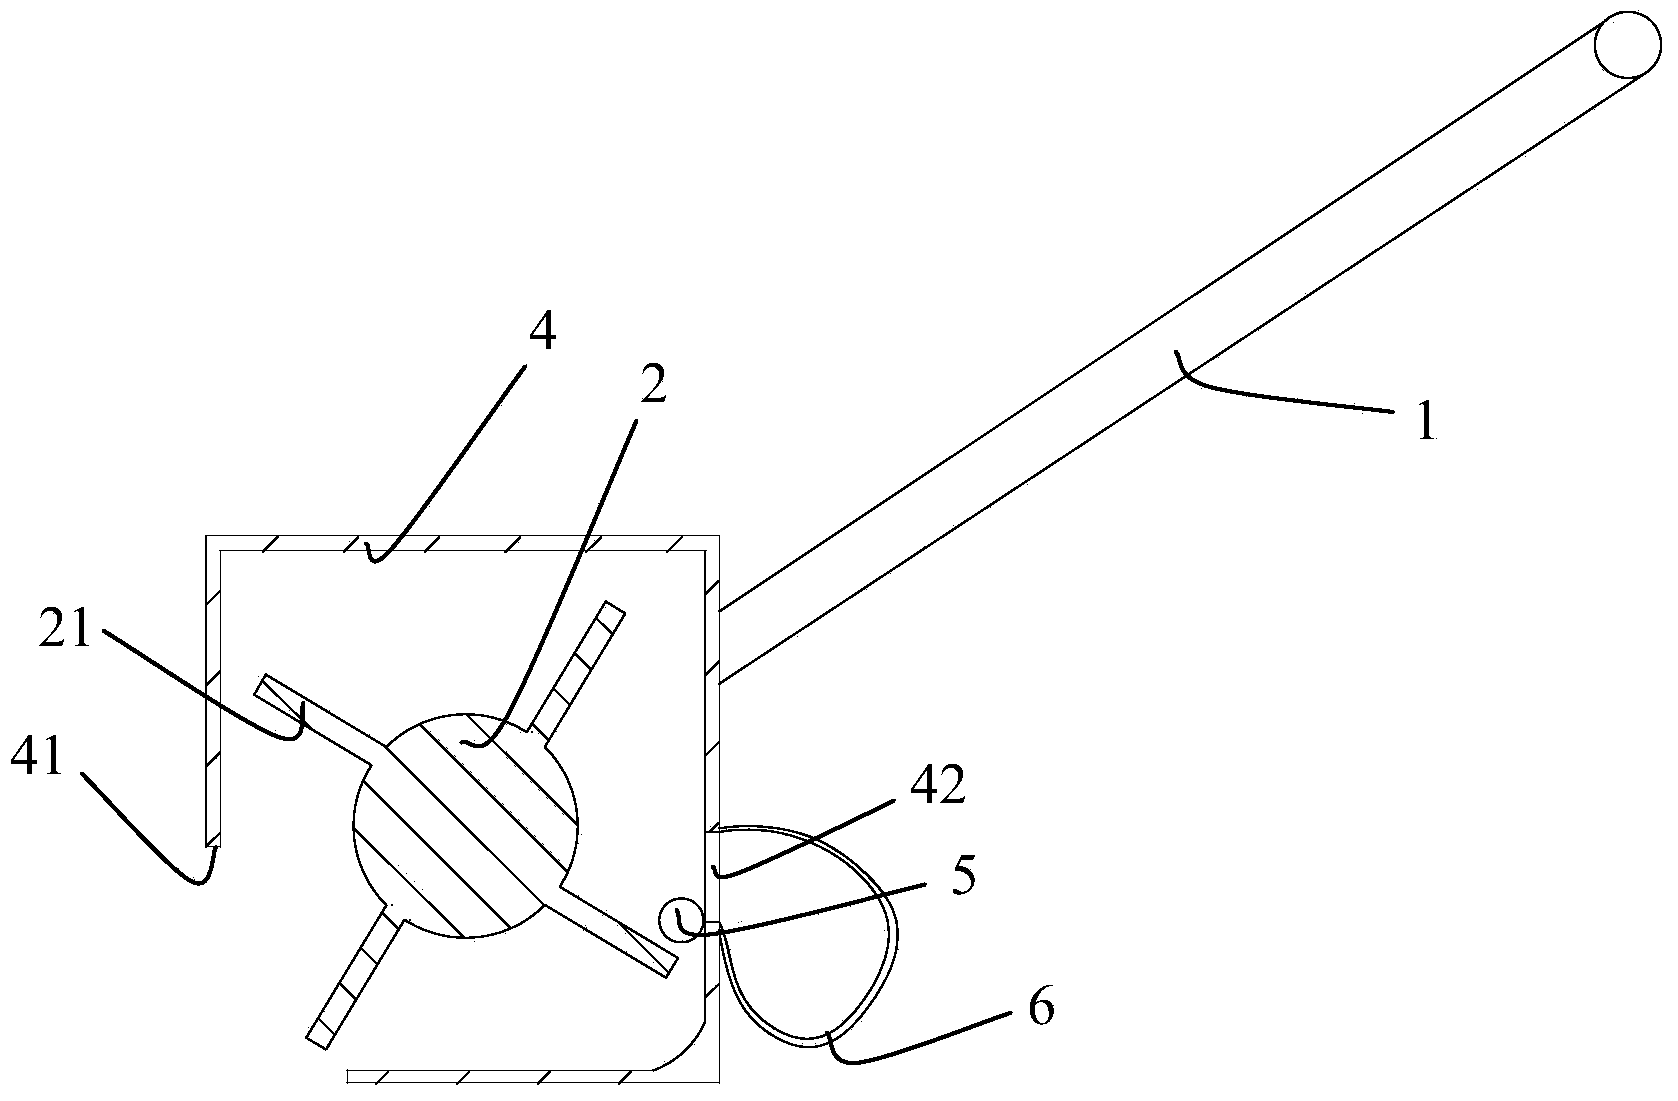 Ball picking device